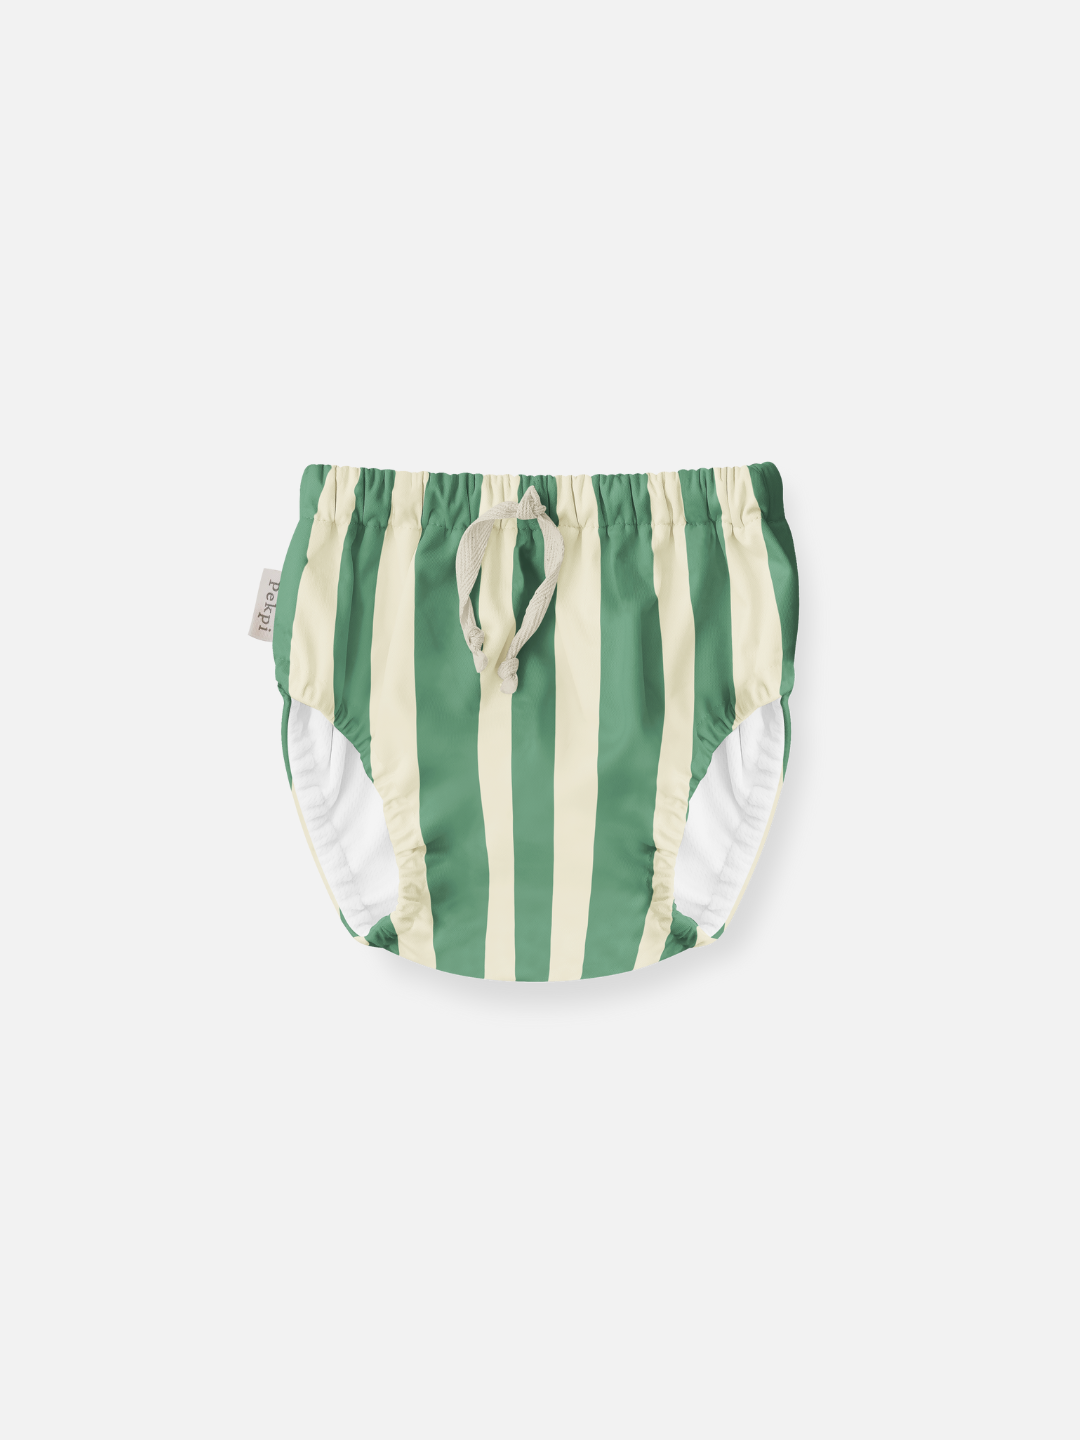 The front view of the swim diaper with an elastic waist with a tie and elastic leg holes. The diaper is a has cream and moss green vertical stripes. 